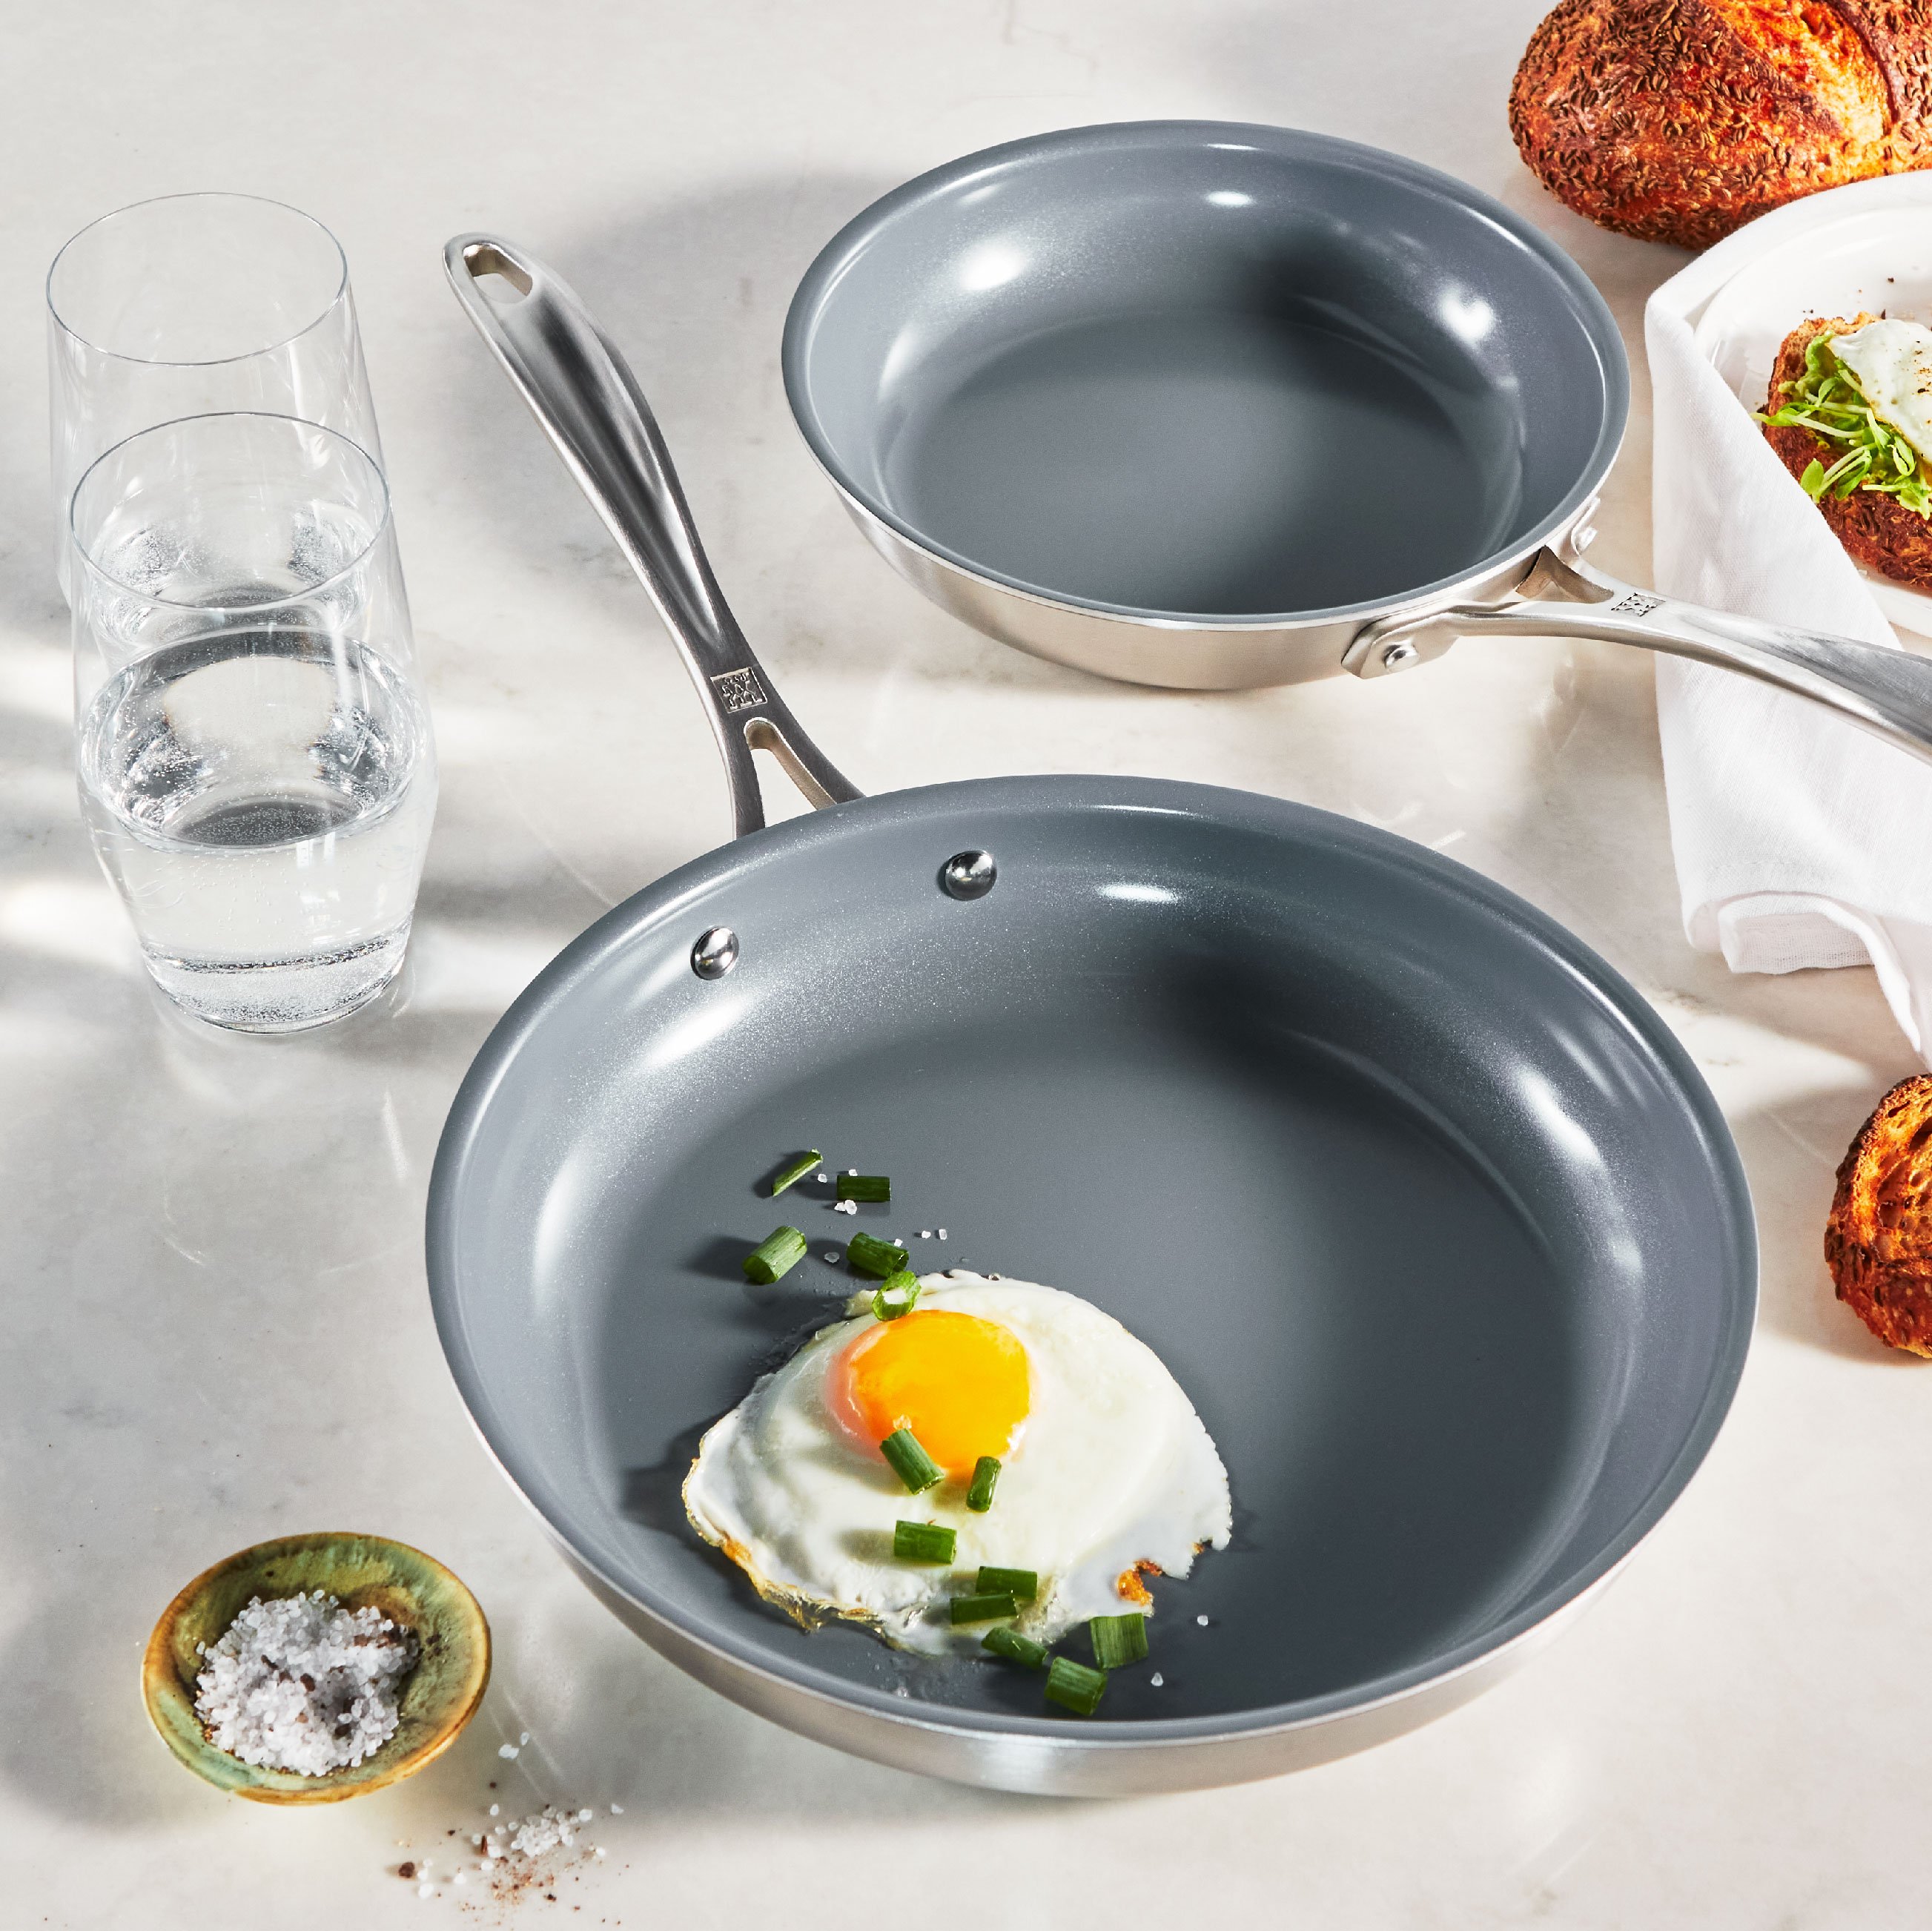 https://www.zwilling.com/on/demandware.static/-/Sites-zwilling-us-Library/default/dwbfe9ff07/images/product-content/masonry-content/zwilling/cookware/spirit/ZW_Spirit_Coated-02.jpg